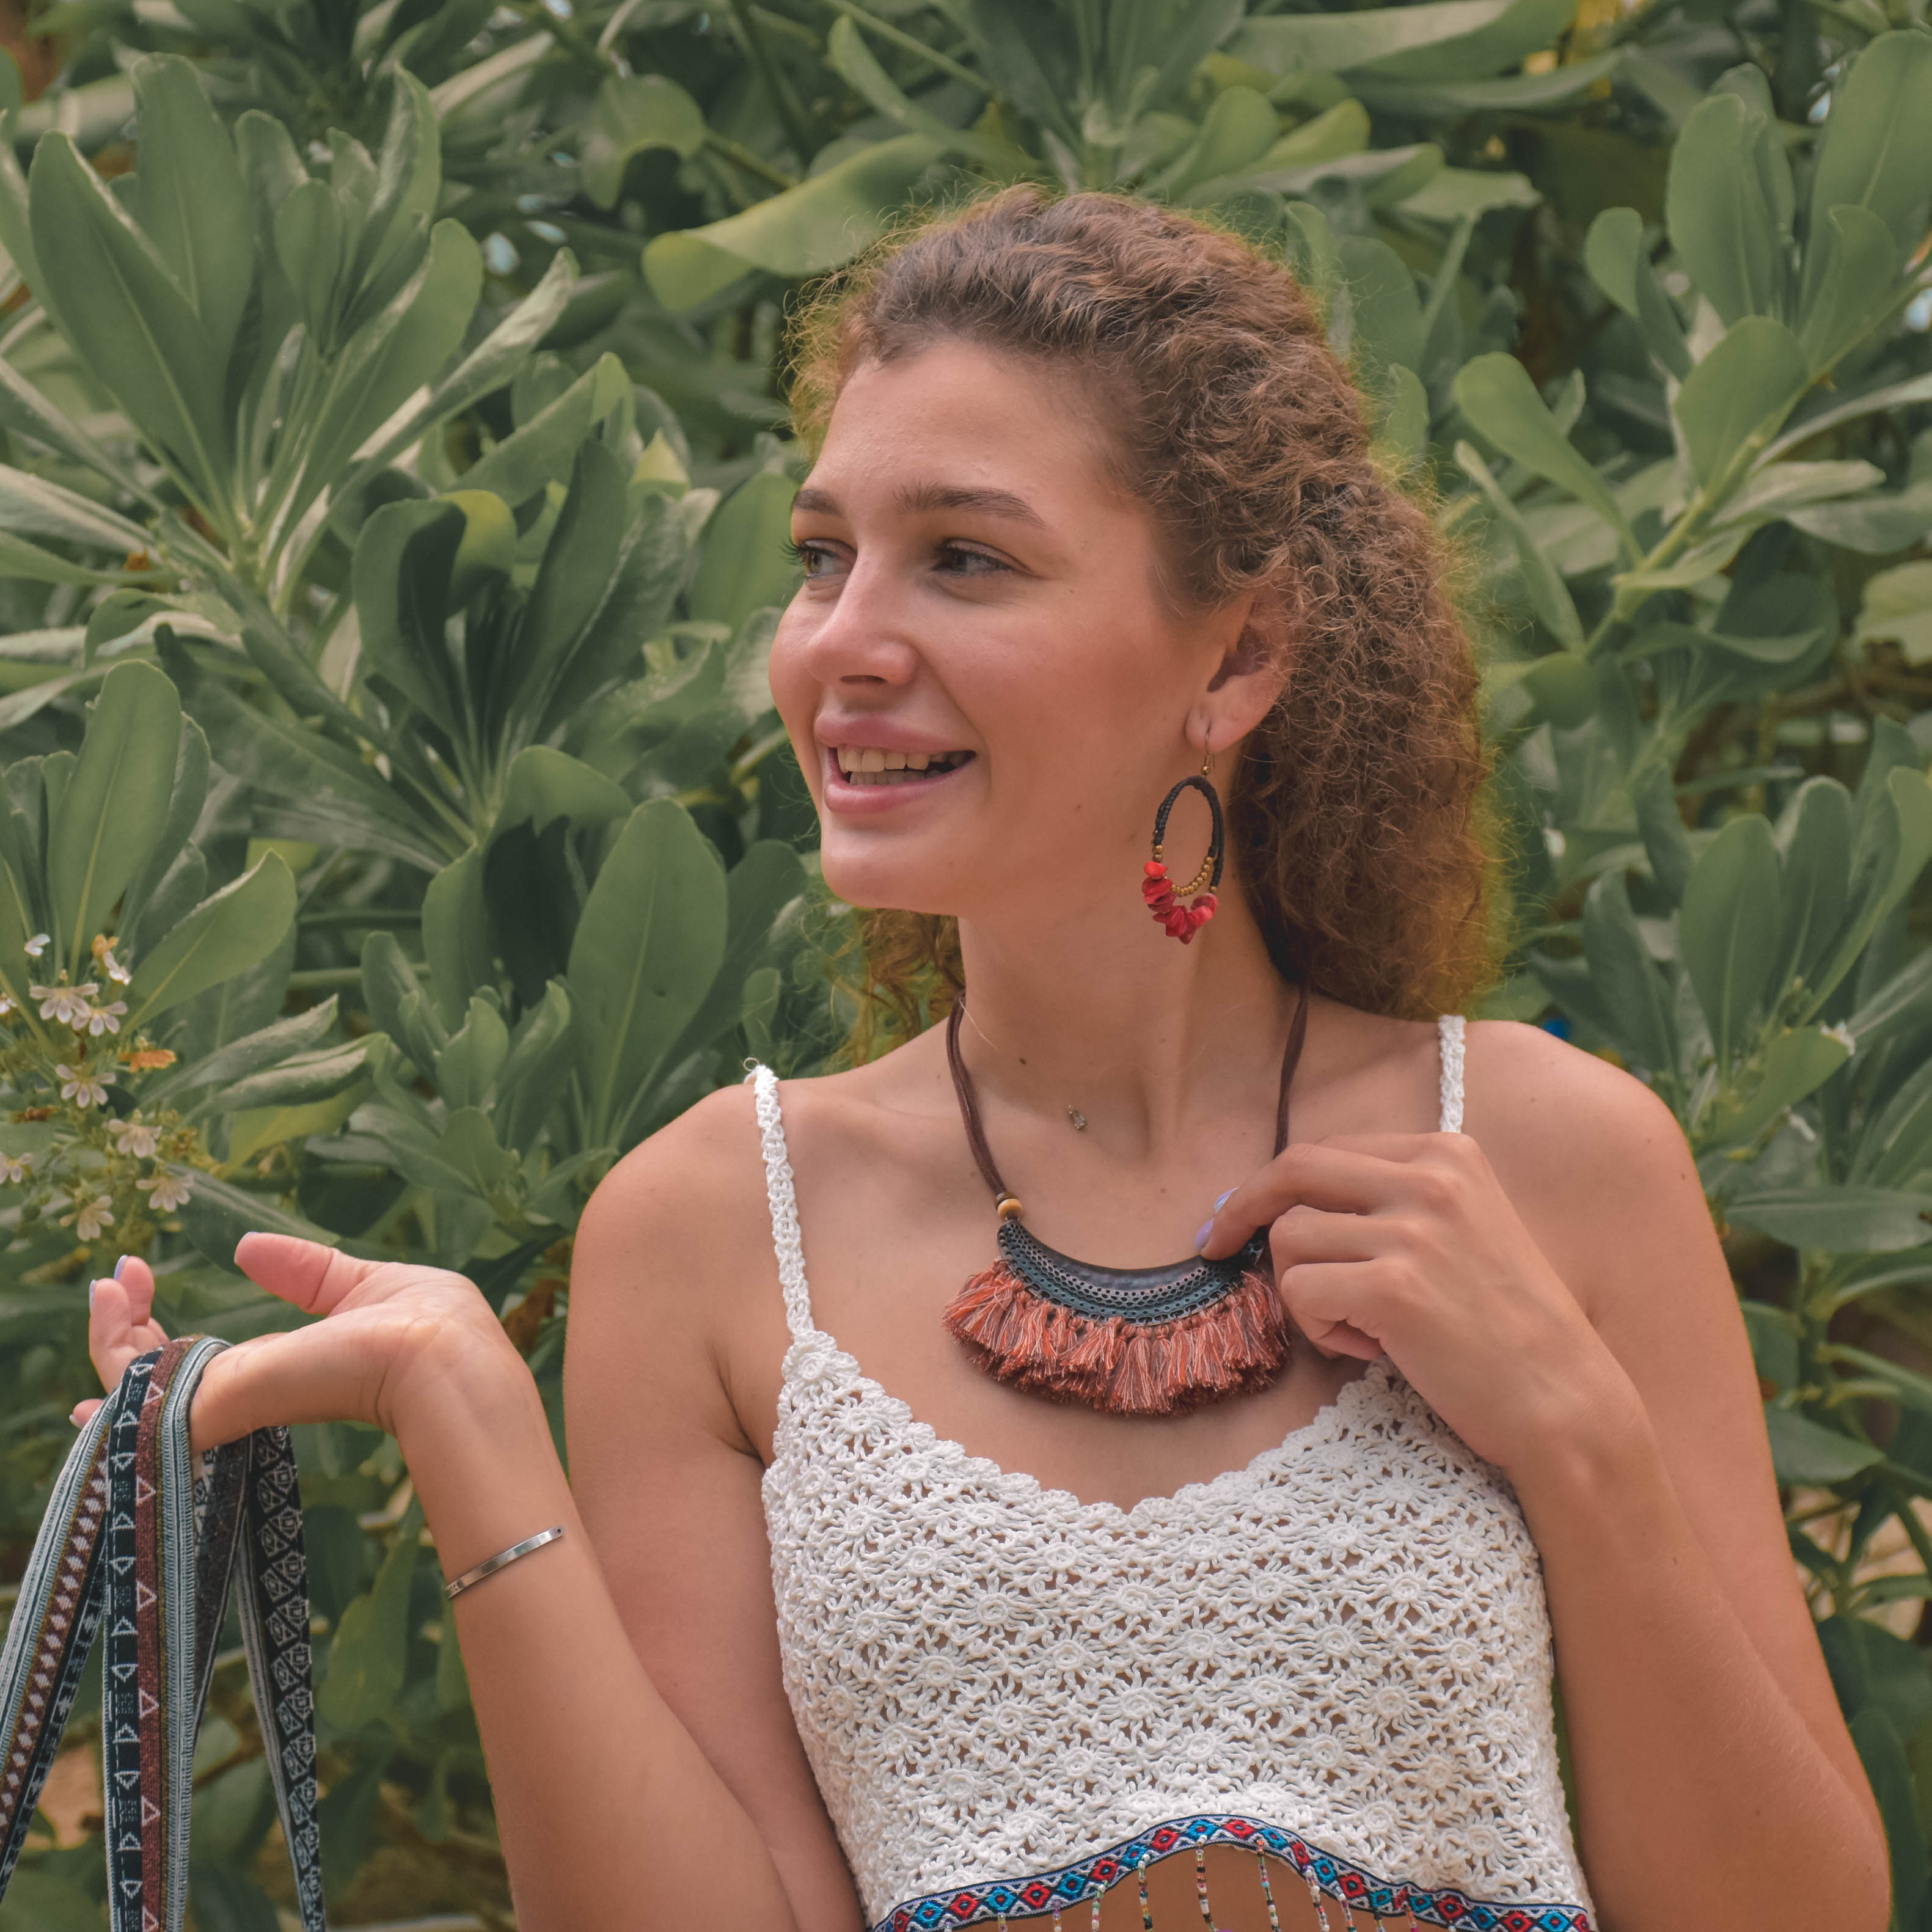 SAMUI NECKLACE Elepanta Necklaces - Buy Today Elephant Pants Jewelry And Bohemian Clothes Handmade In Thailand Help To Save The Elephants FairTrade And Vegan